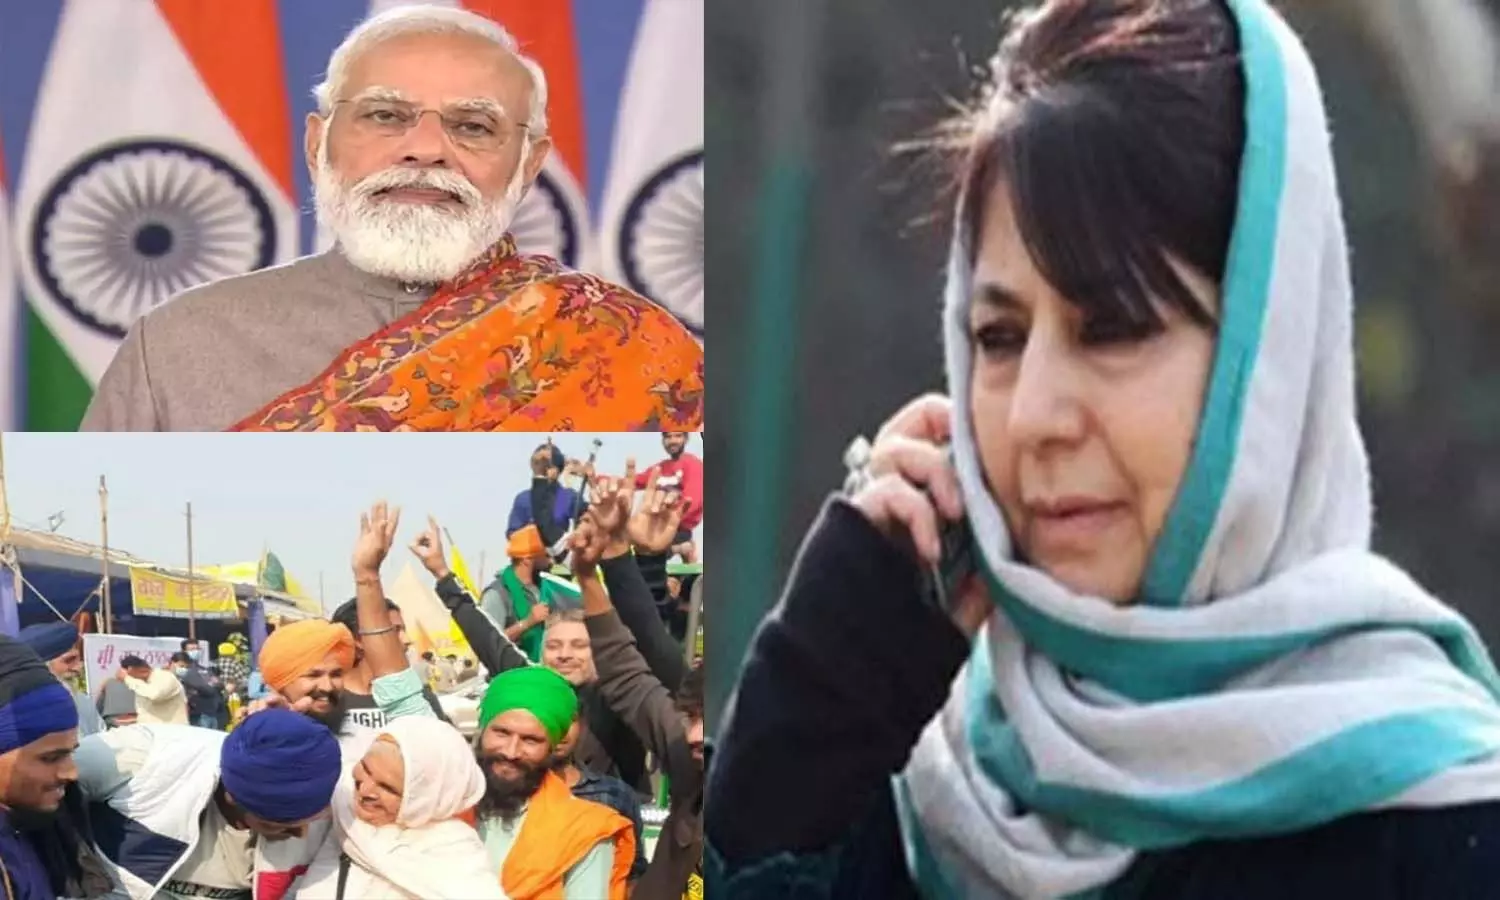 Former Jammu and Kashmir Chief Minister Mehbooba Mufti raised the demand for restoration of Article 370